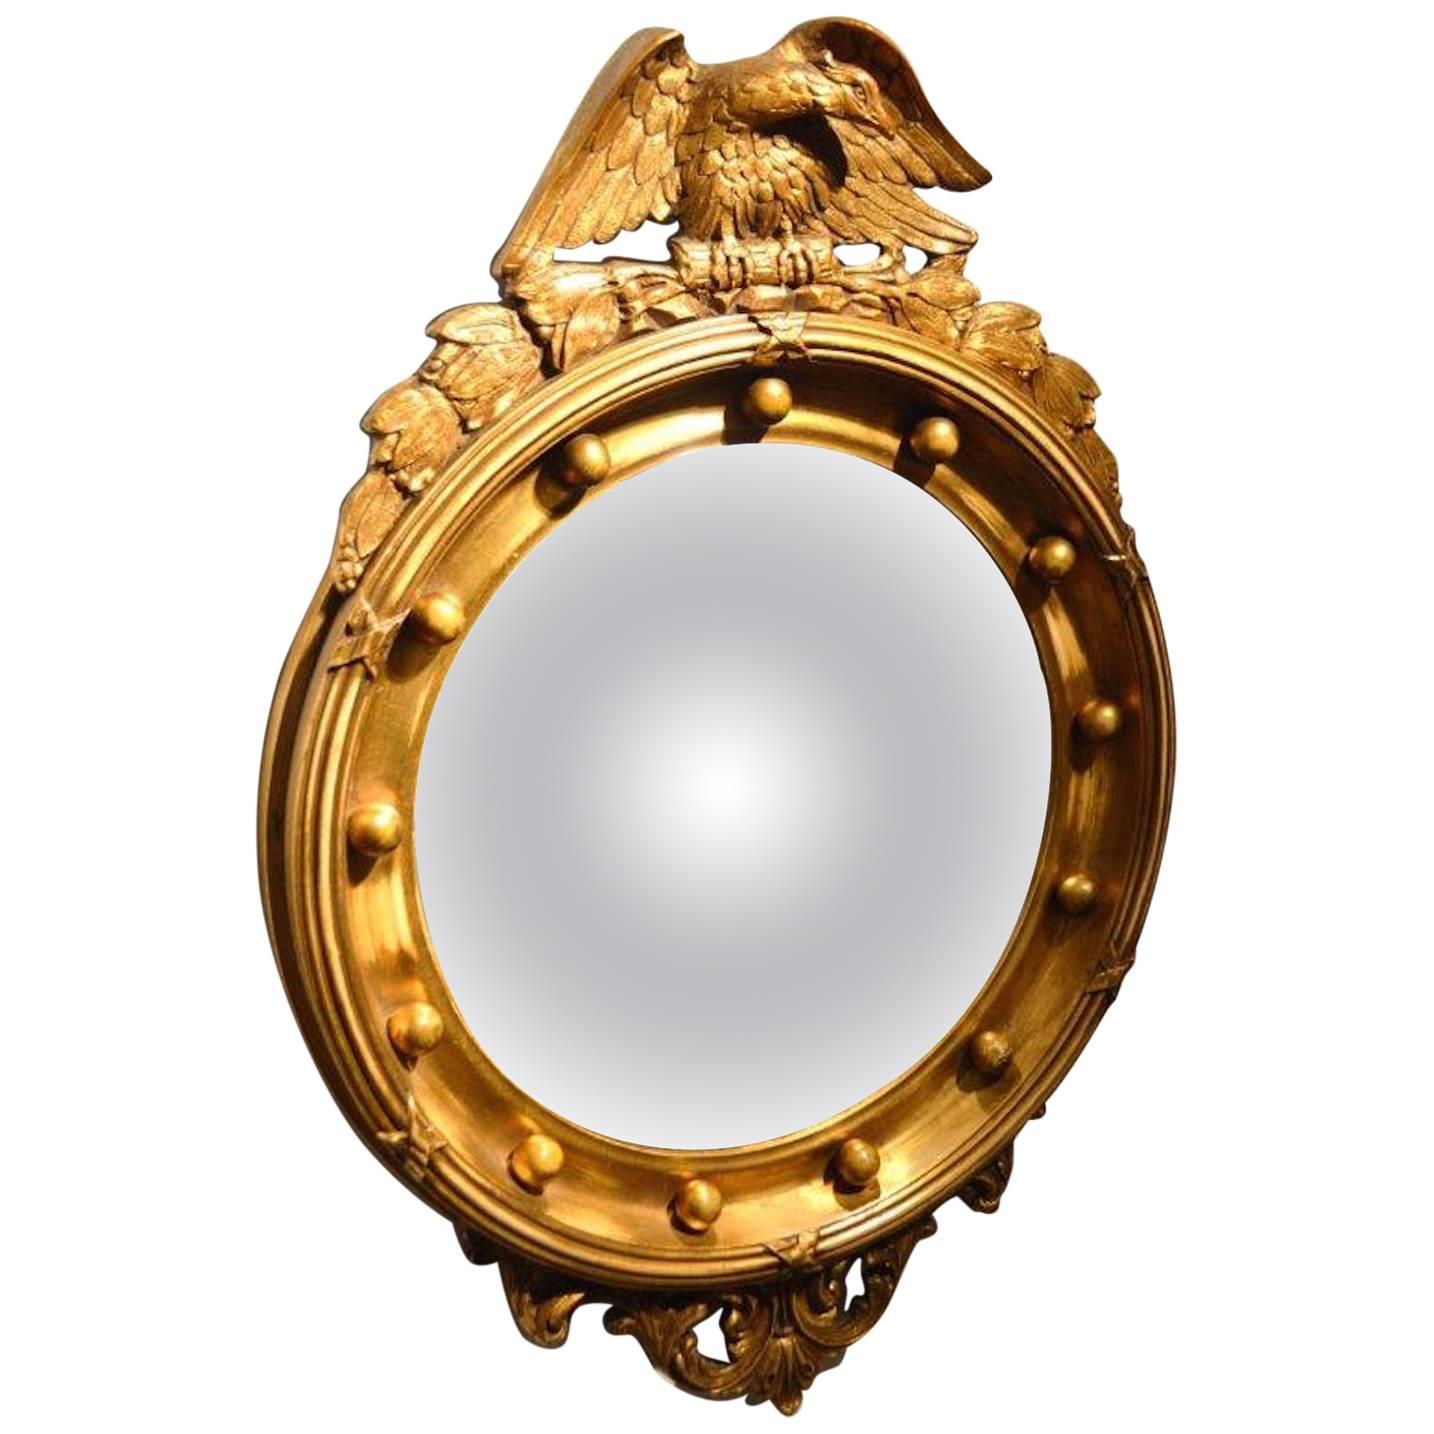 Carved Gilt-Wood and Gesso Regency Style Convex Mirror